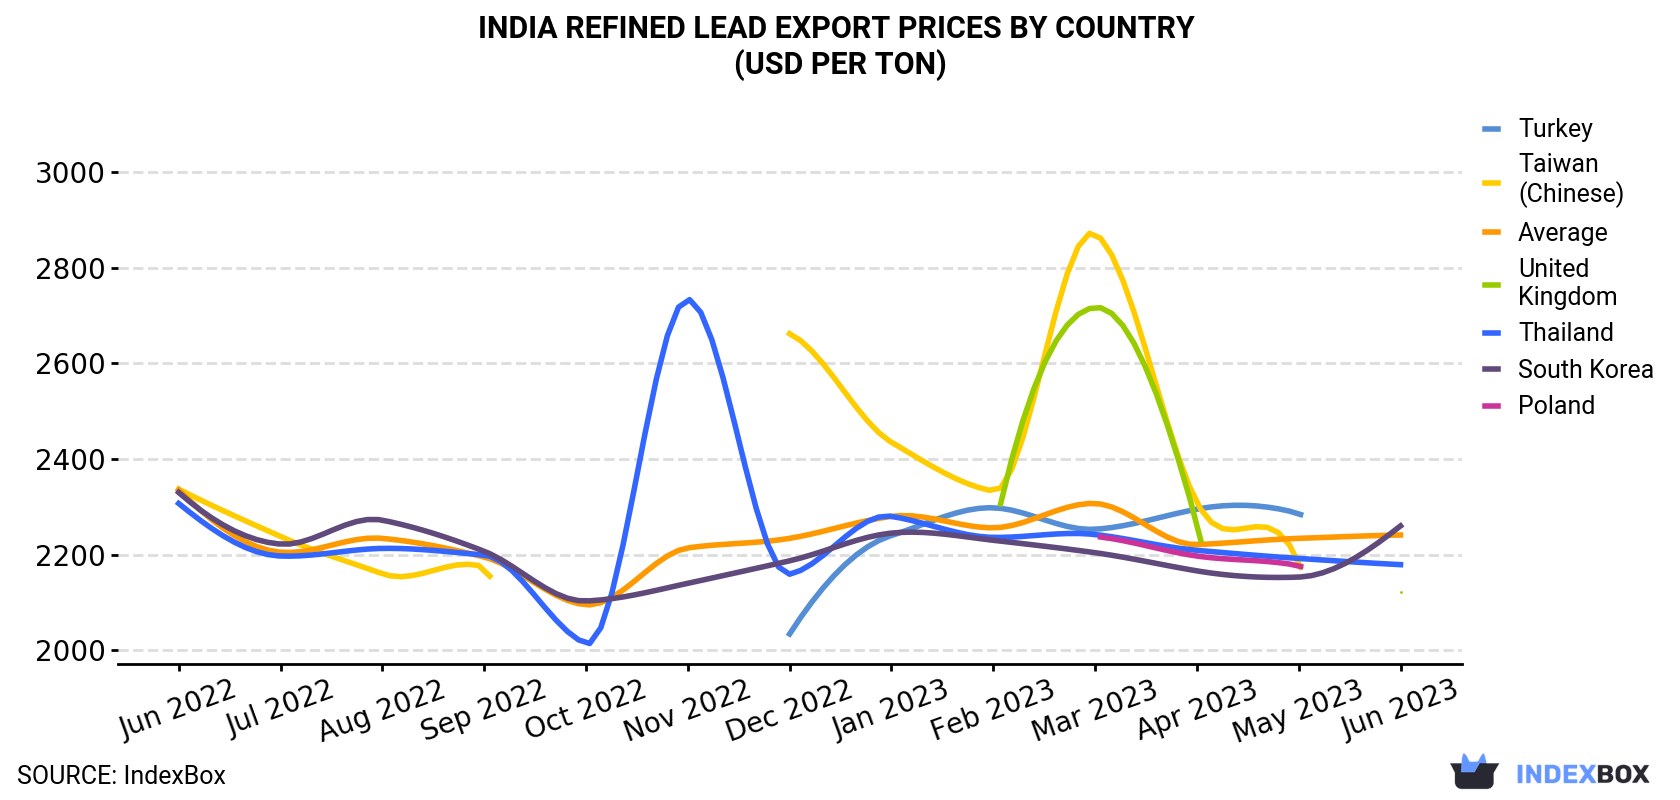 India Refined Lead Export Prices By Country (USD Per Ton)